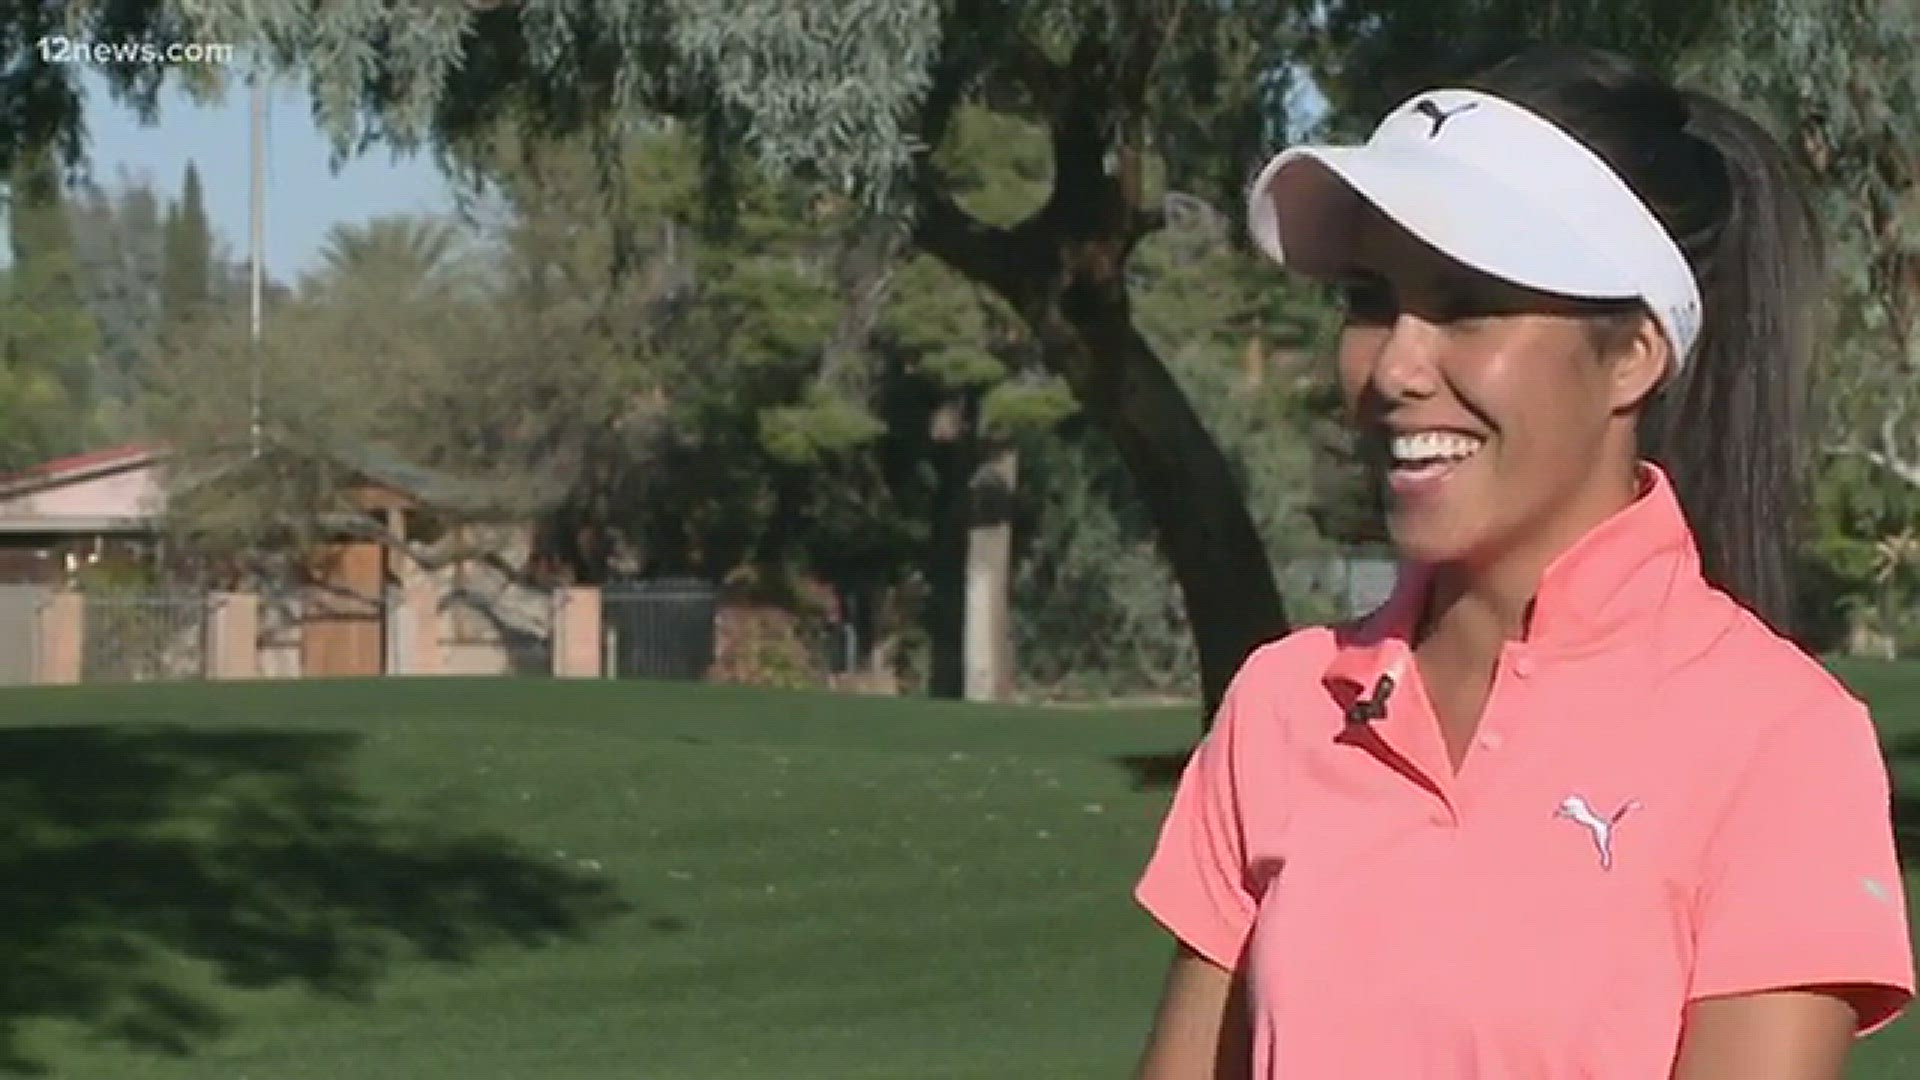 She was in town for the Phoenix Open and caught up with 12 News at Starfire Golf Course in Scottsdale.